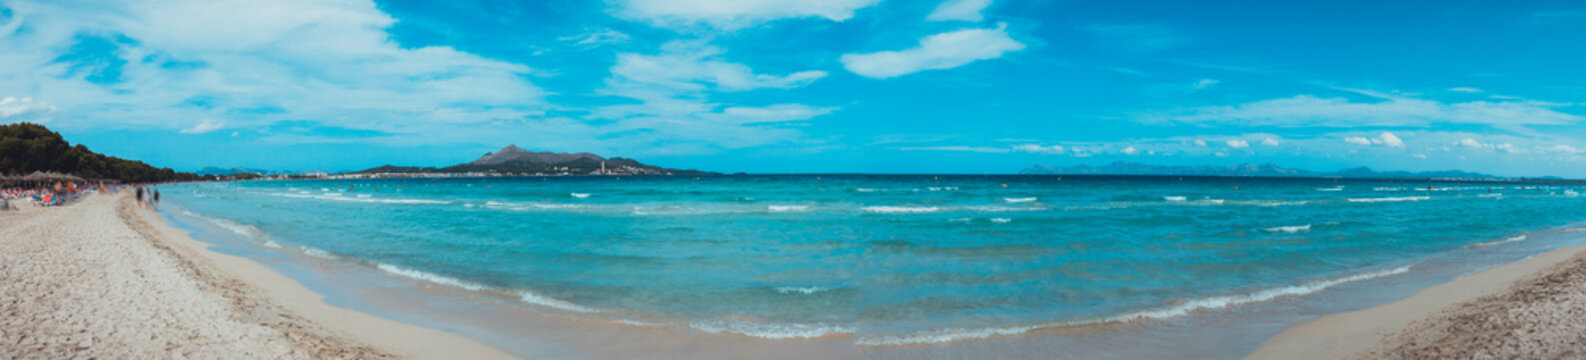 beach at majorca with clean blue water © Robert Herhold